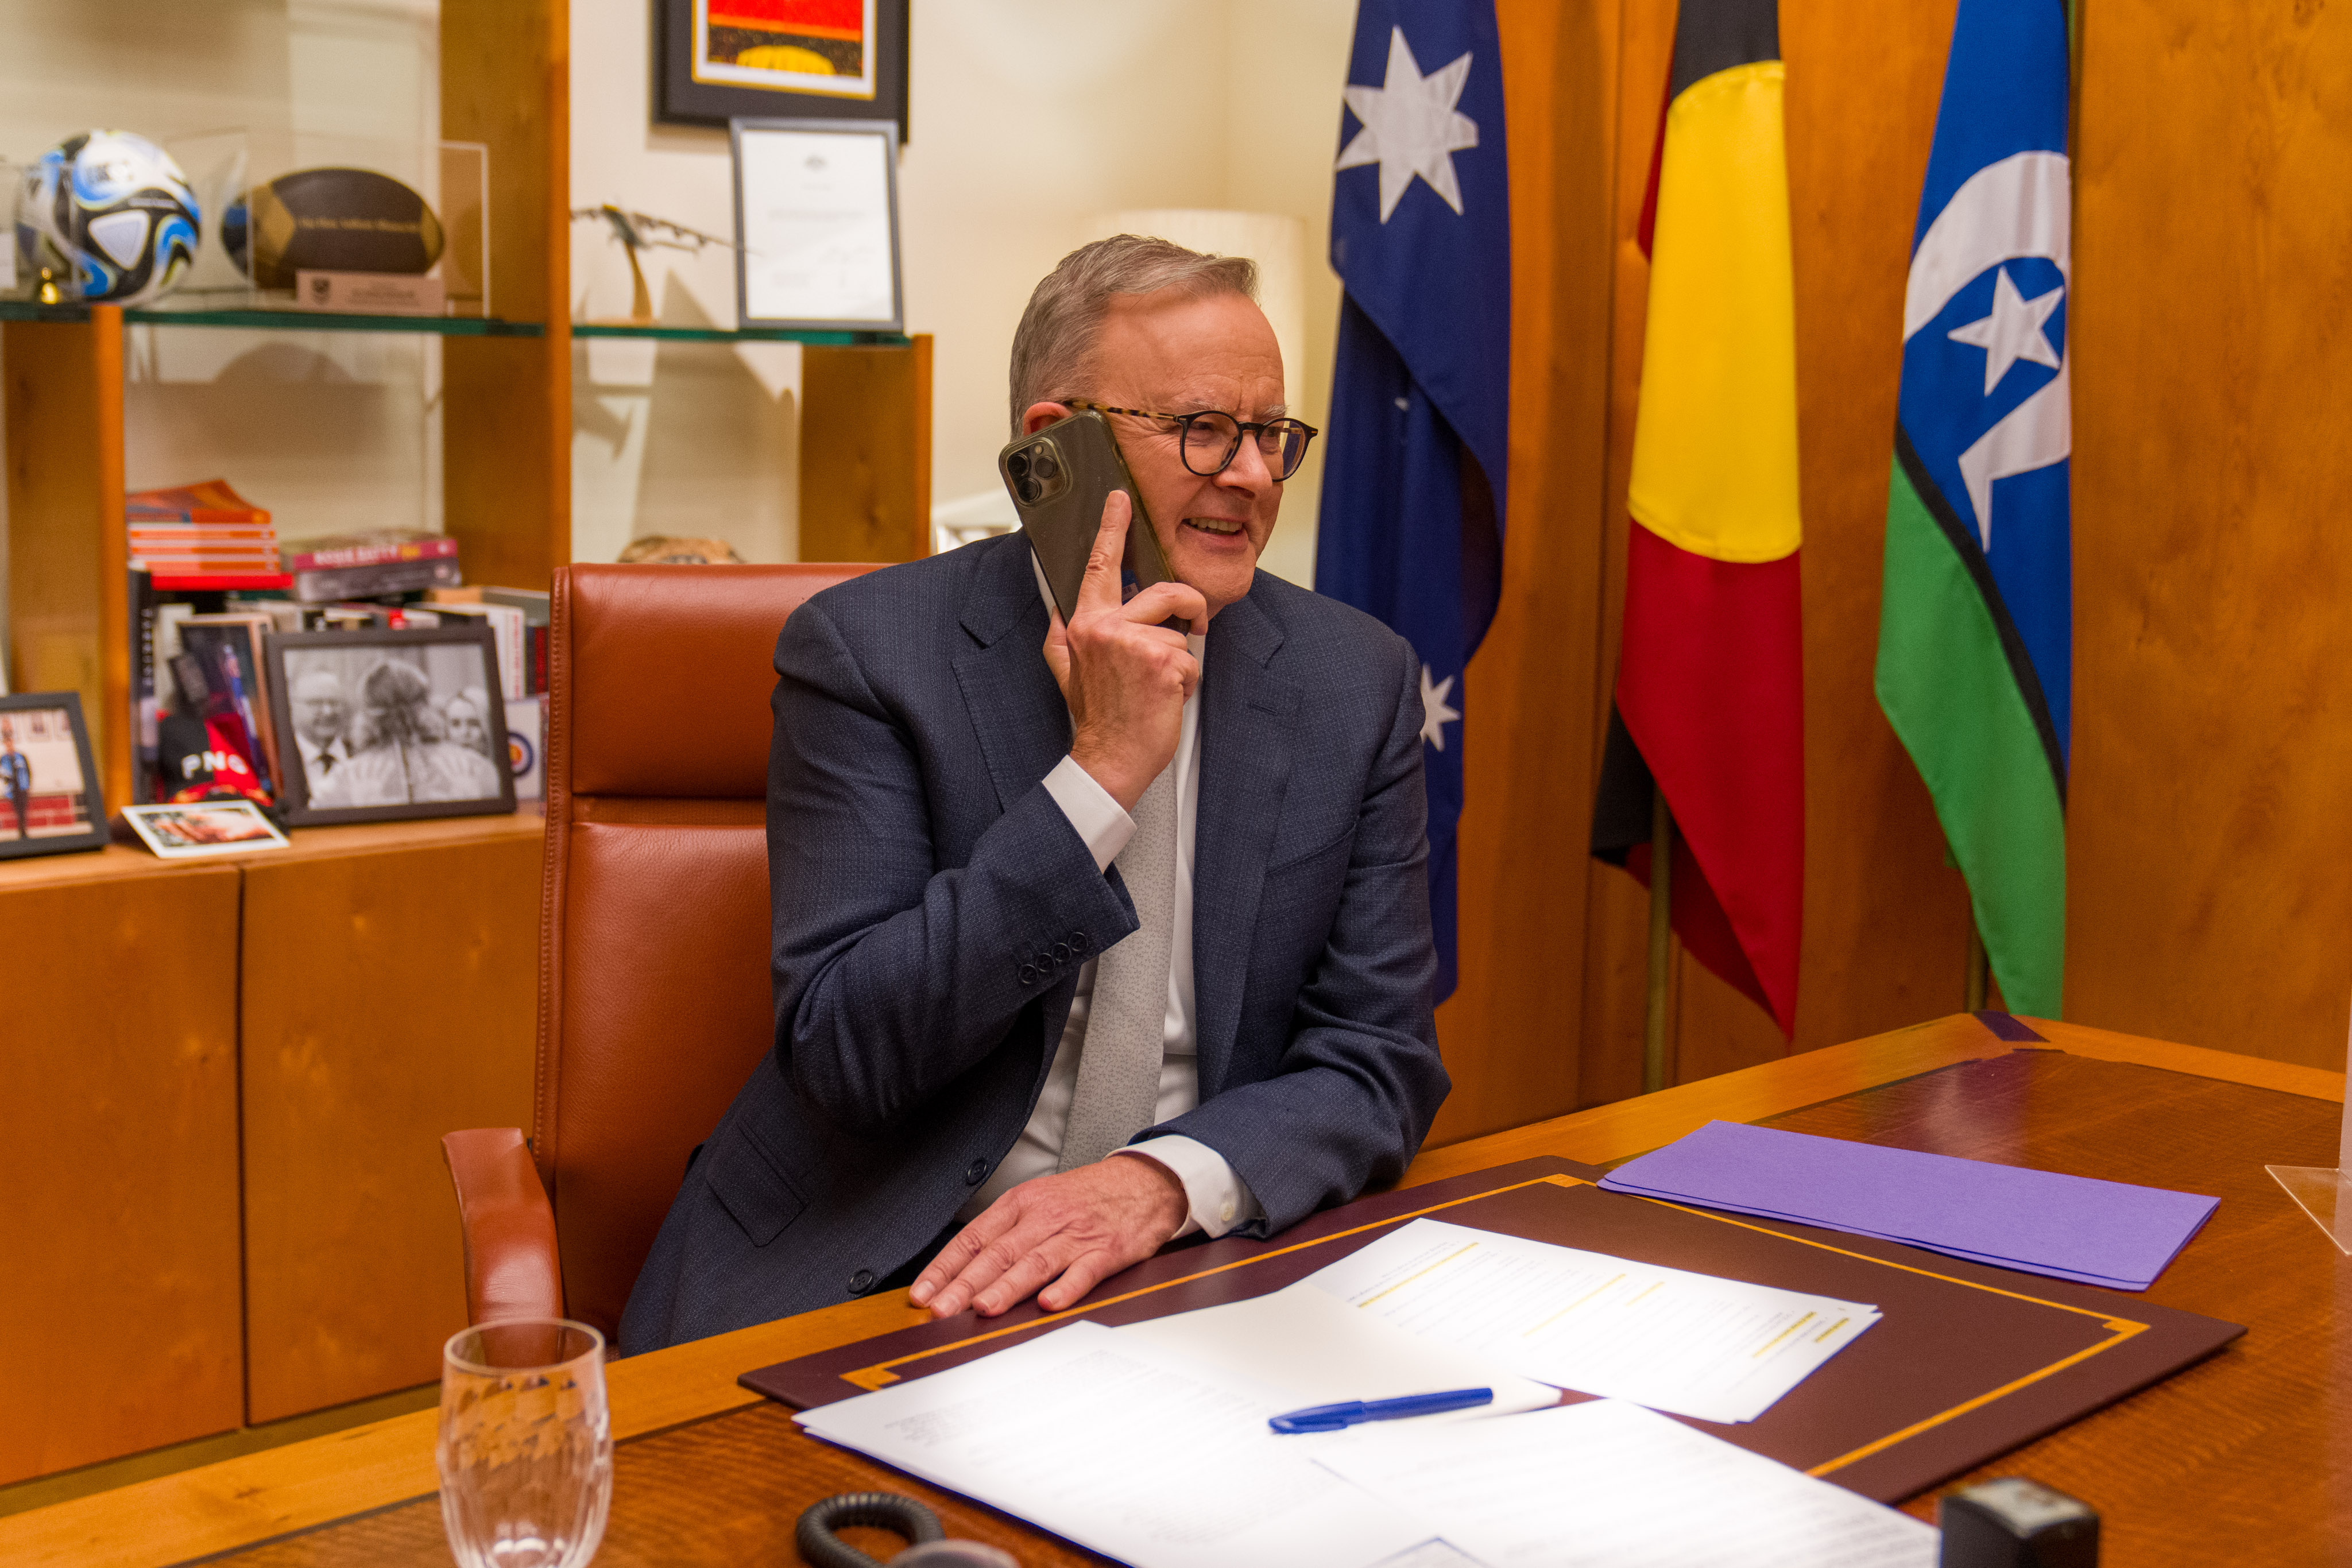 Earlier tonight I was pleased to speak with Julian Assange to welcome him home to his family in Australia.